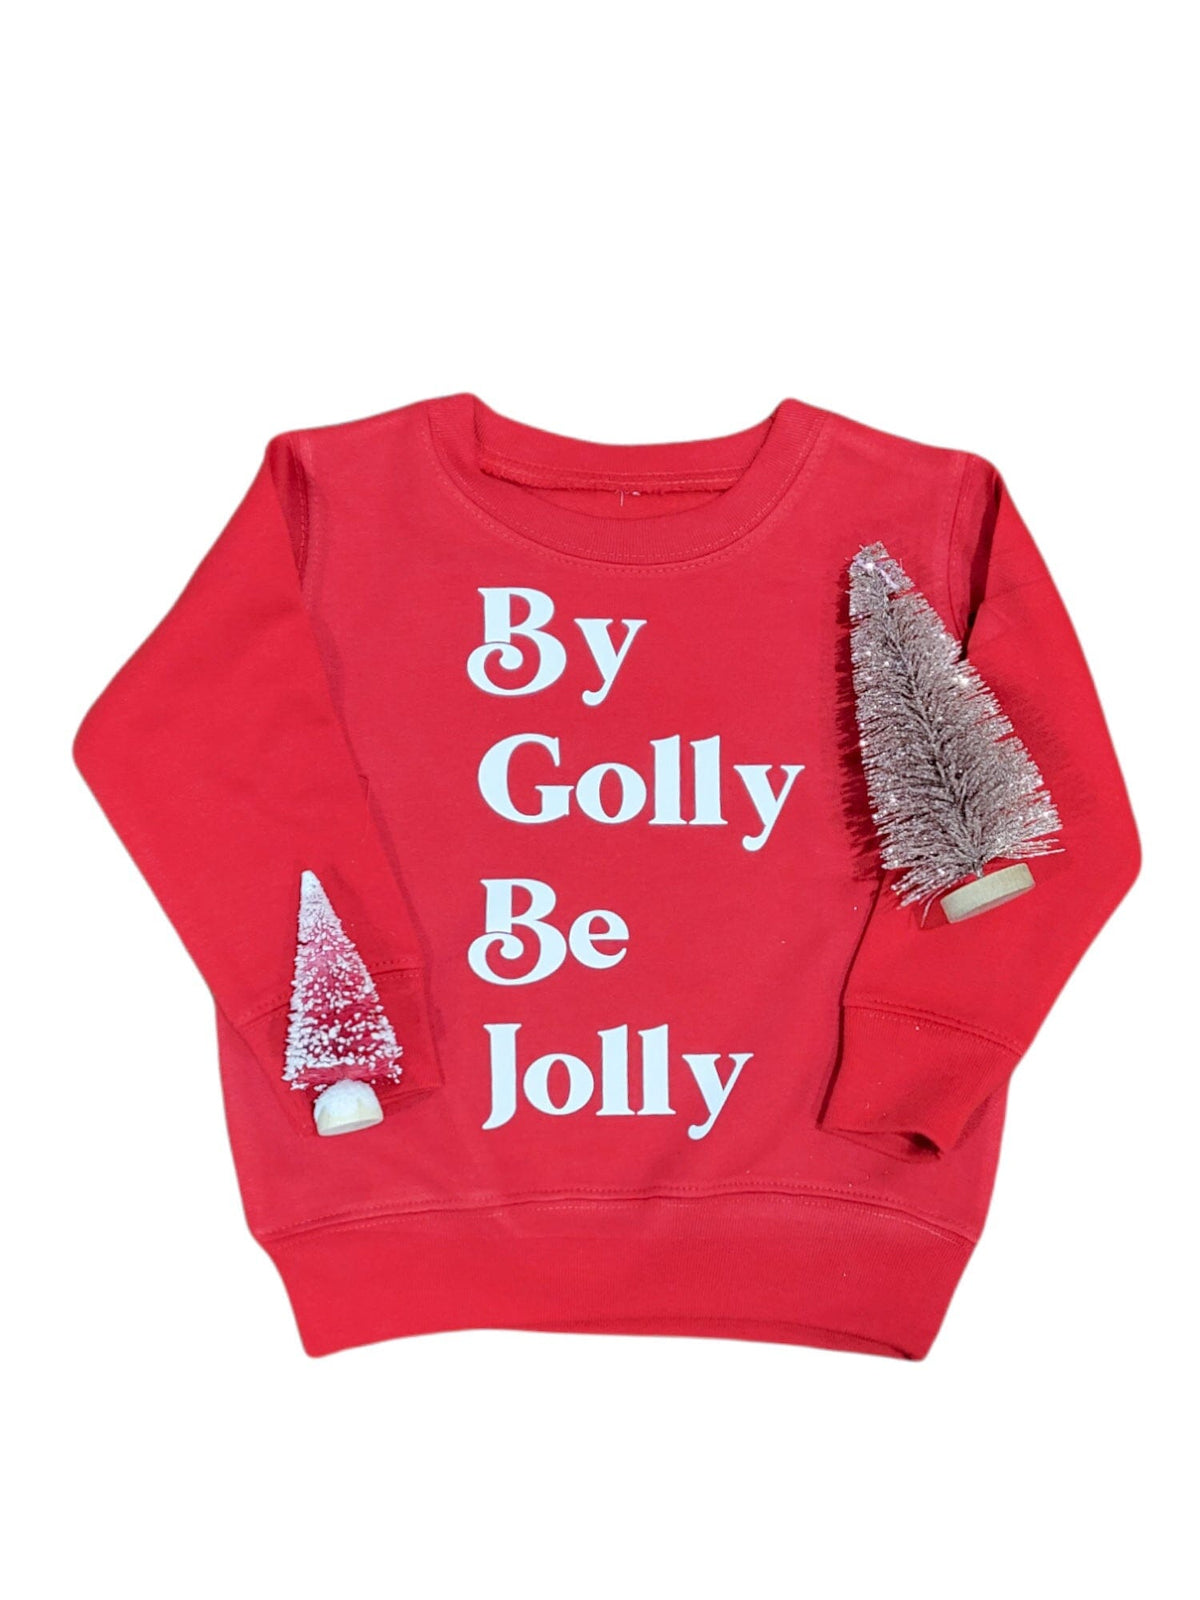 By Golly Be Jolly Toddler Sweatshirt